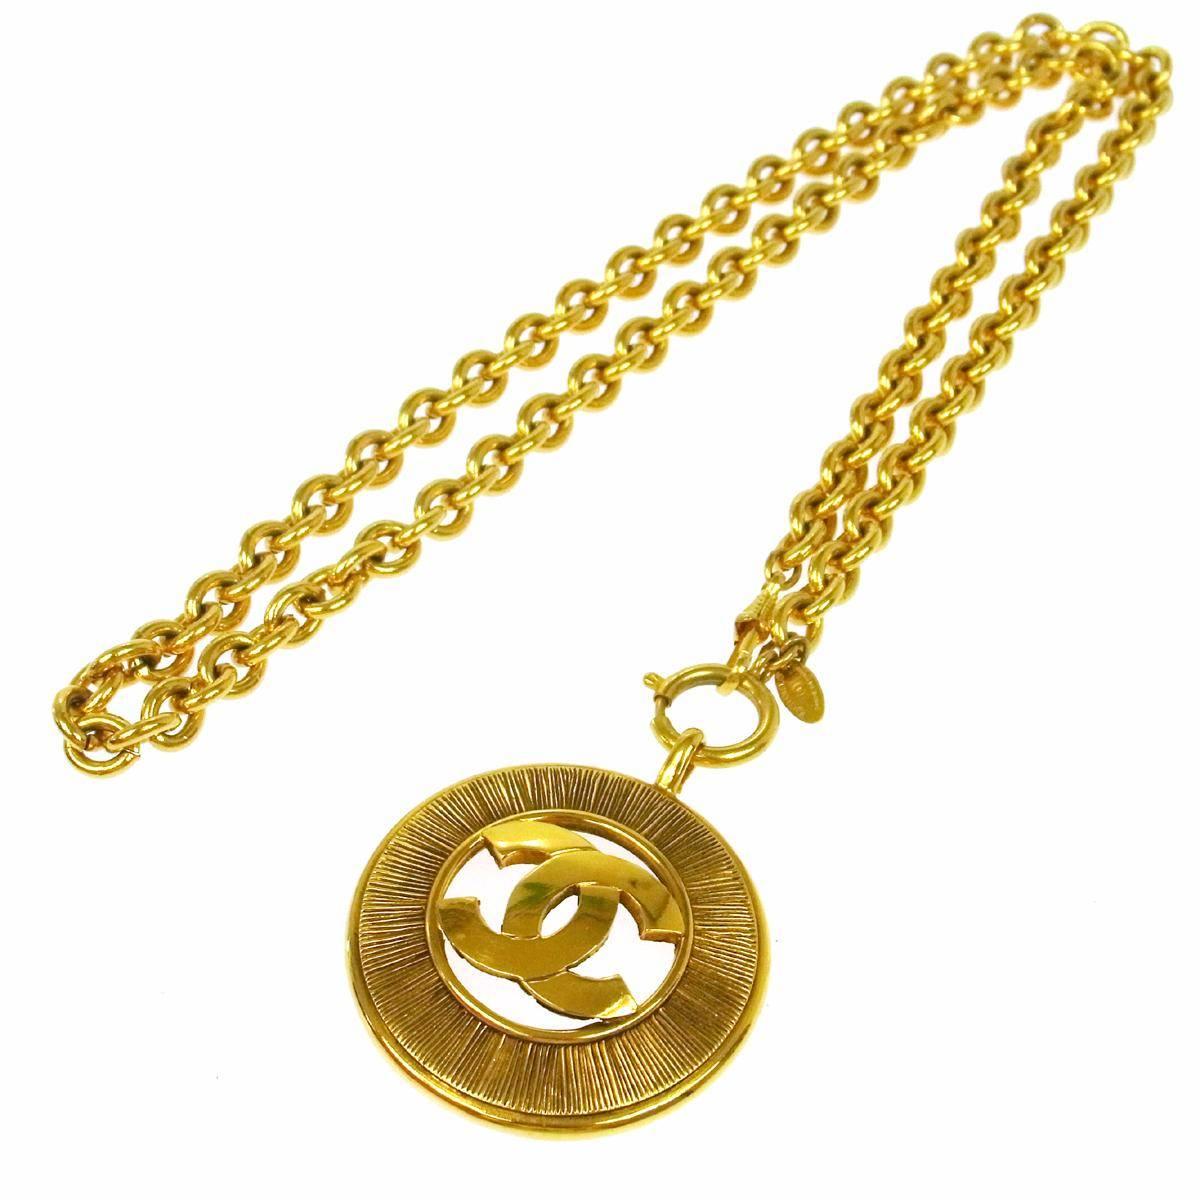 Chanel Vintage Gold Coin Charm Pendant Necklace in Box